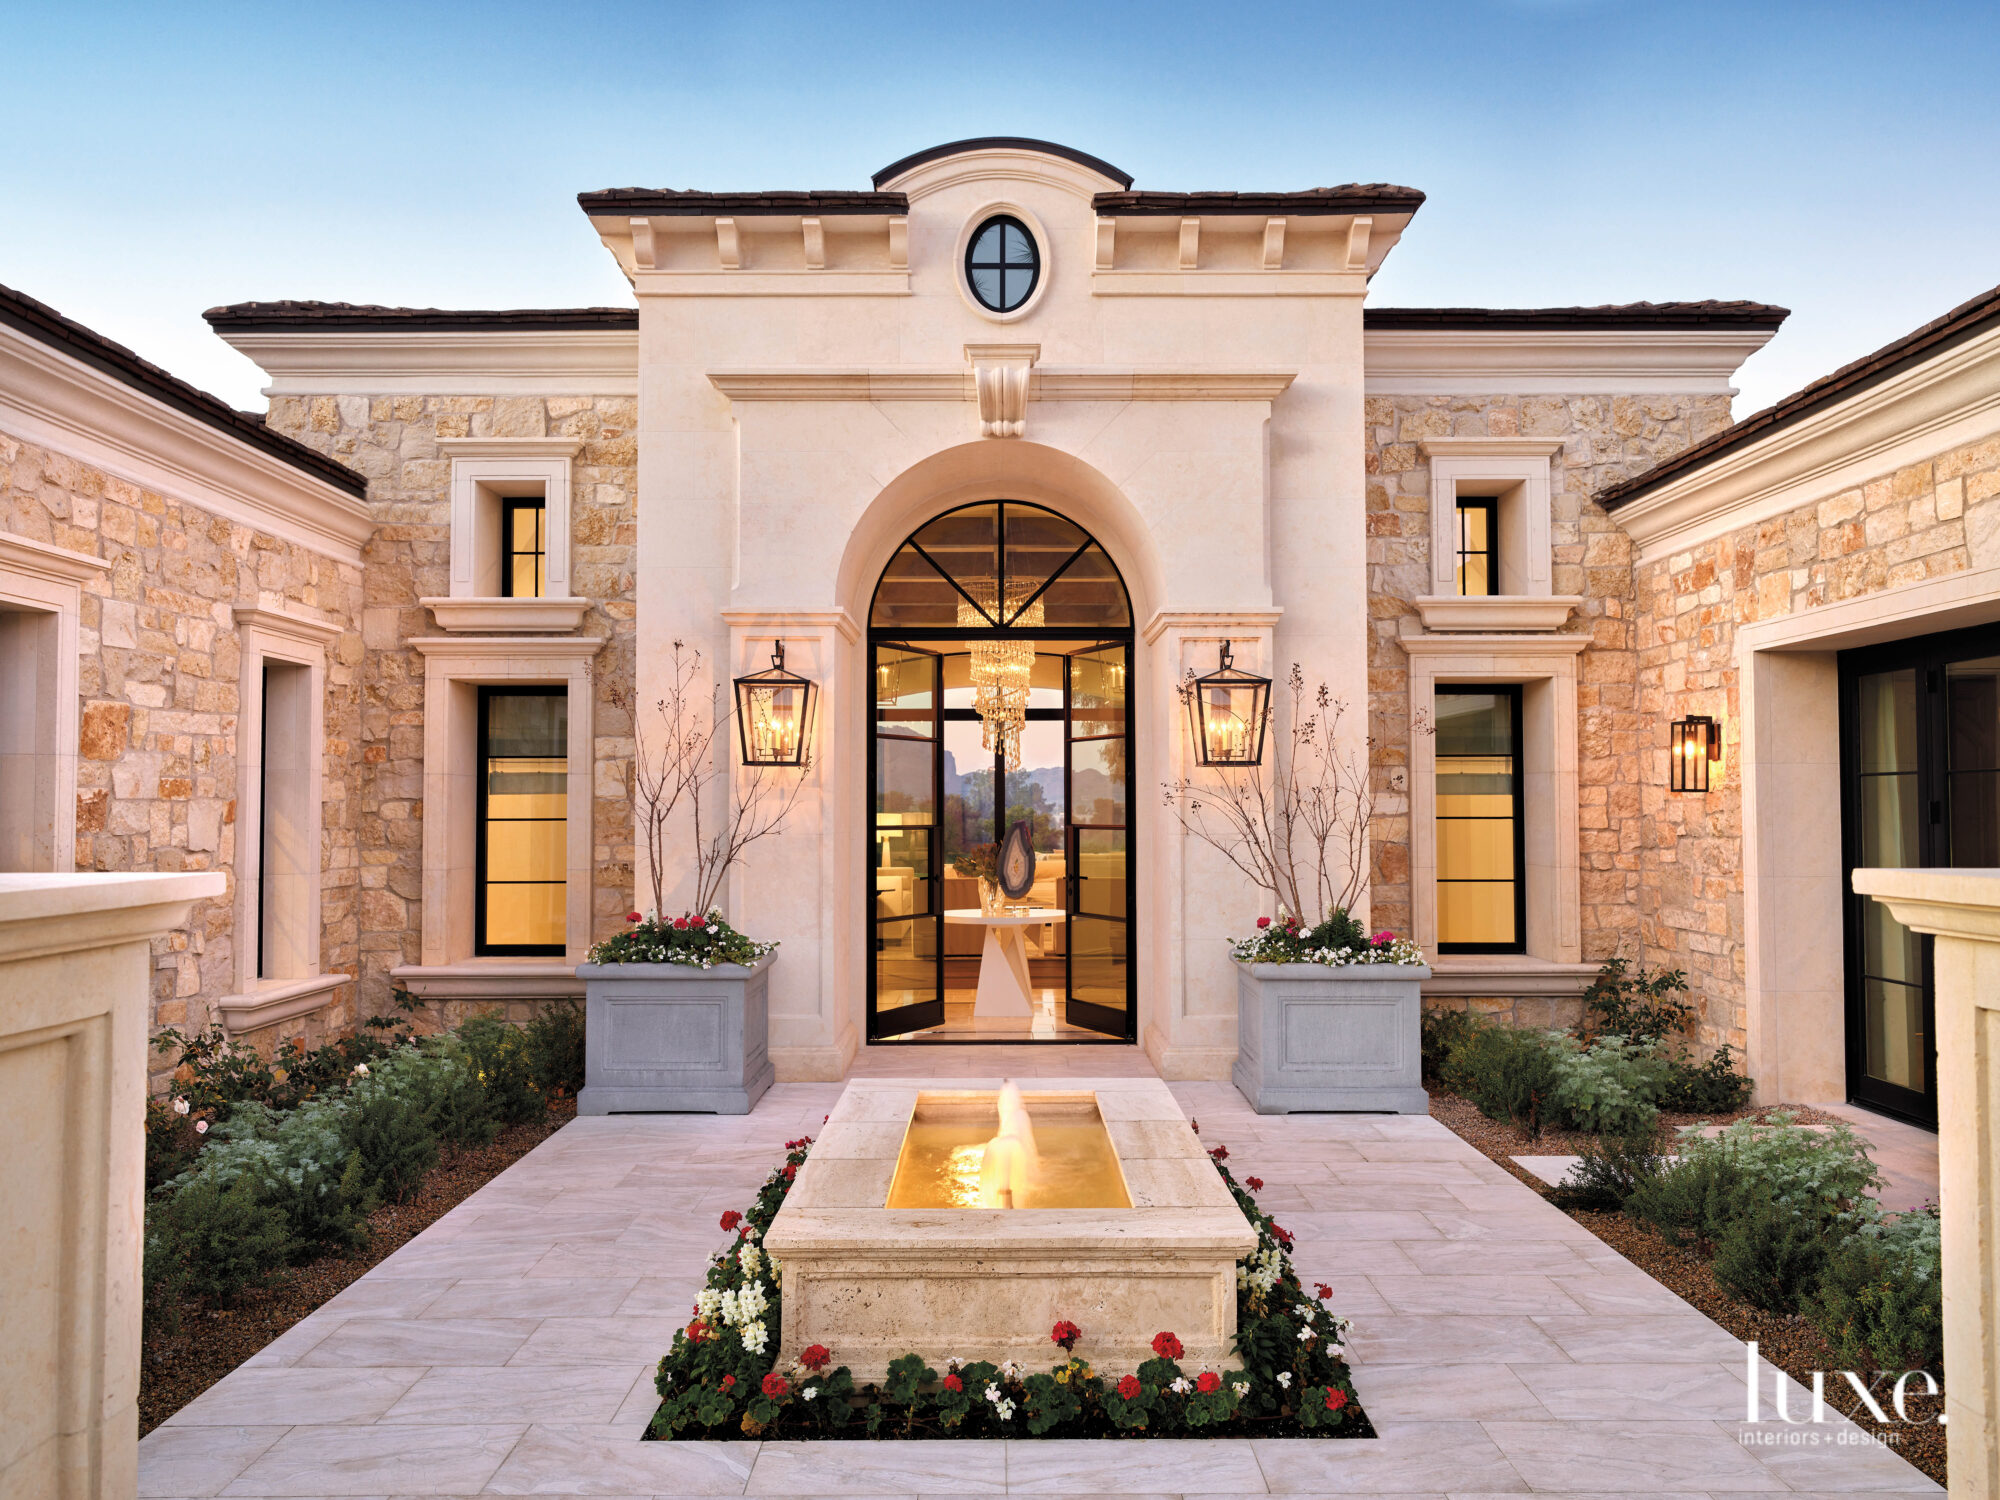 The dramatic entry of this Mediterranean-style home has a custom entry chandelier.